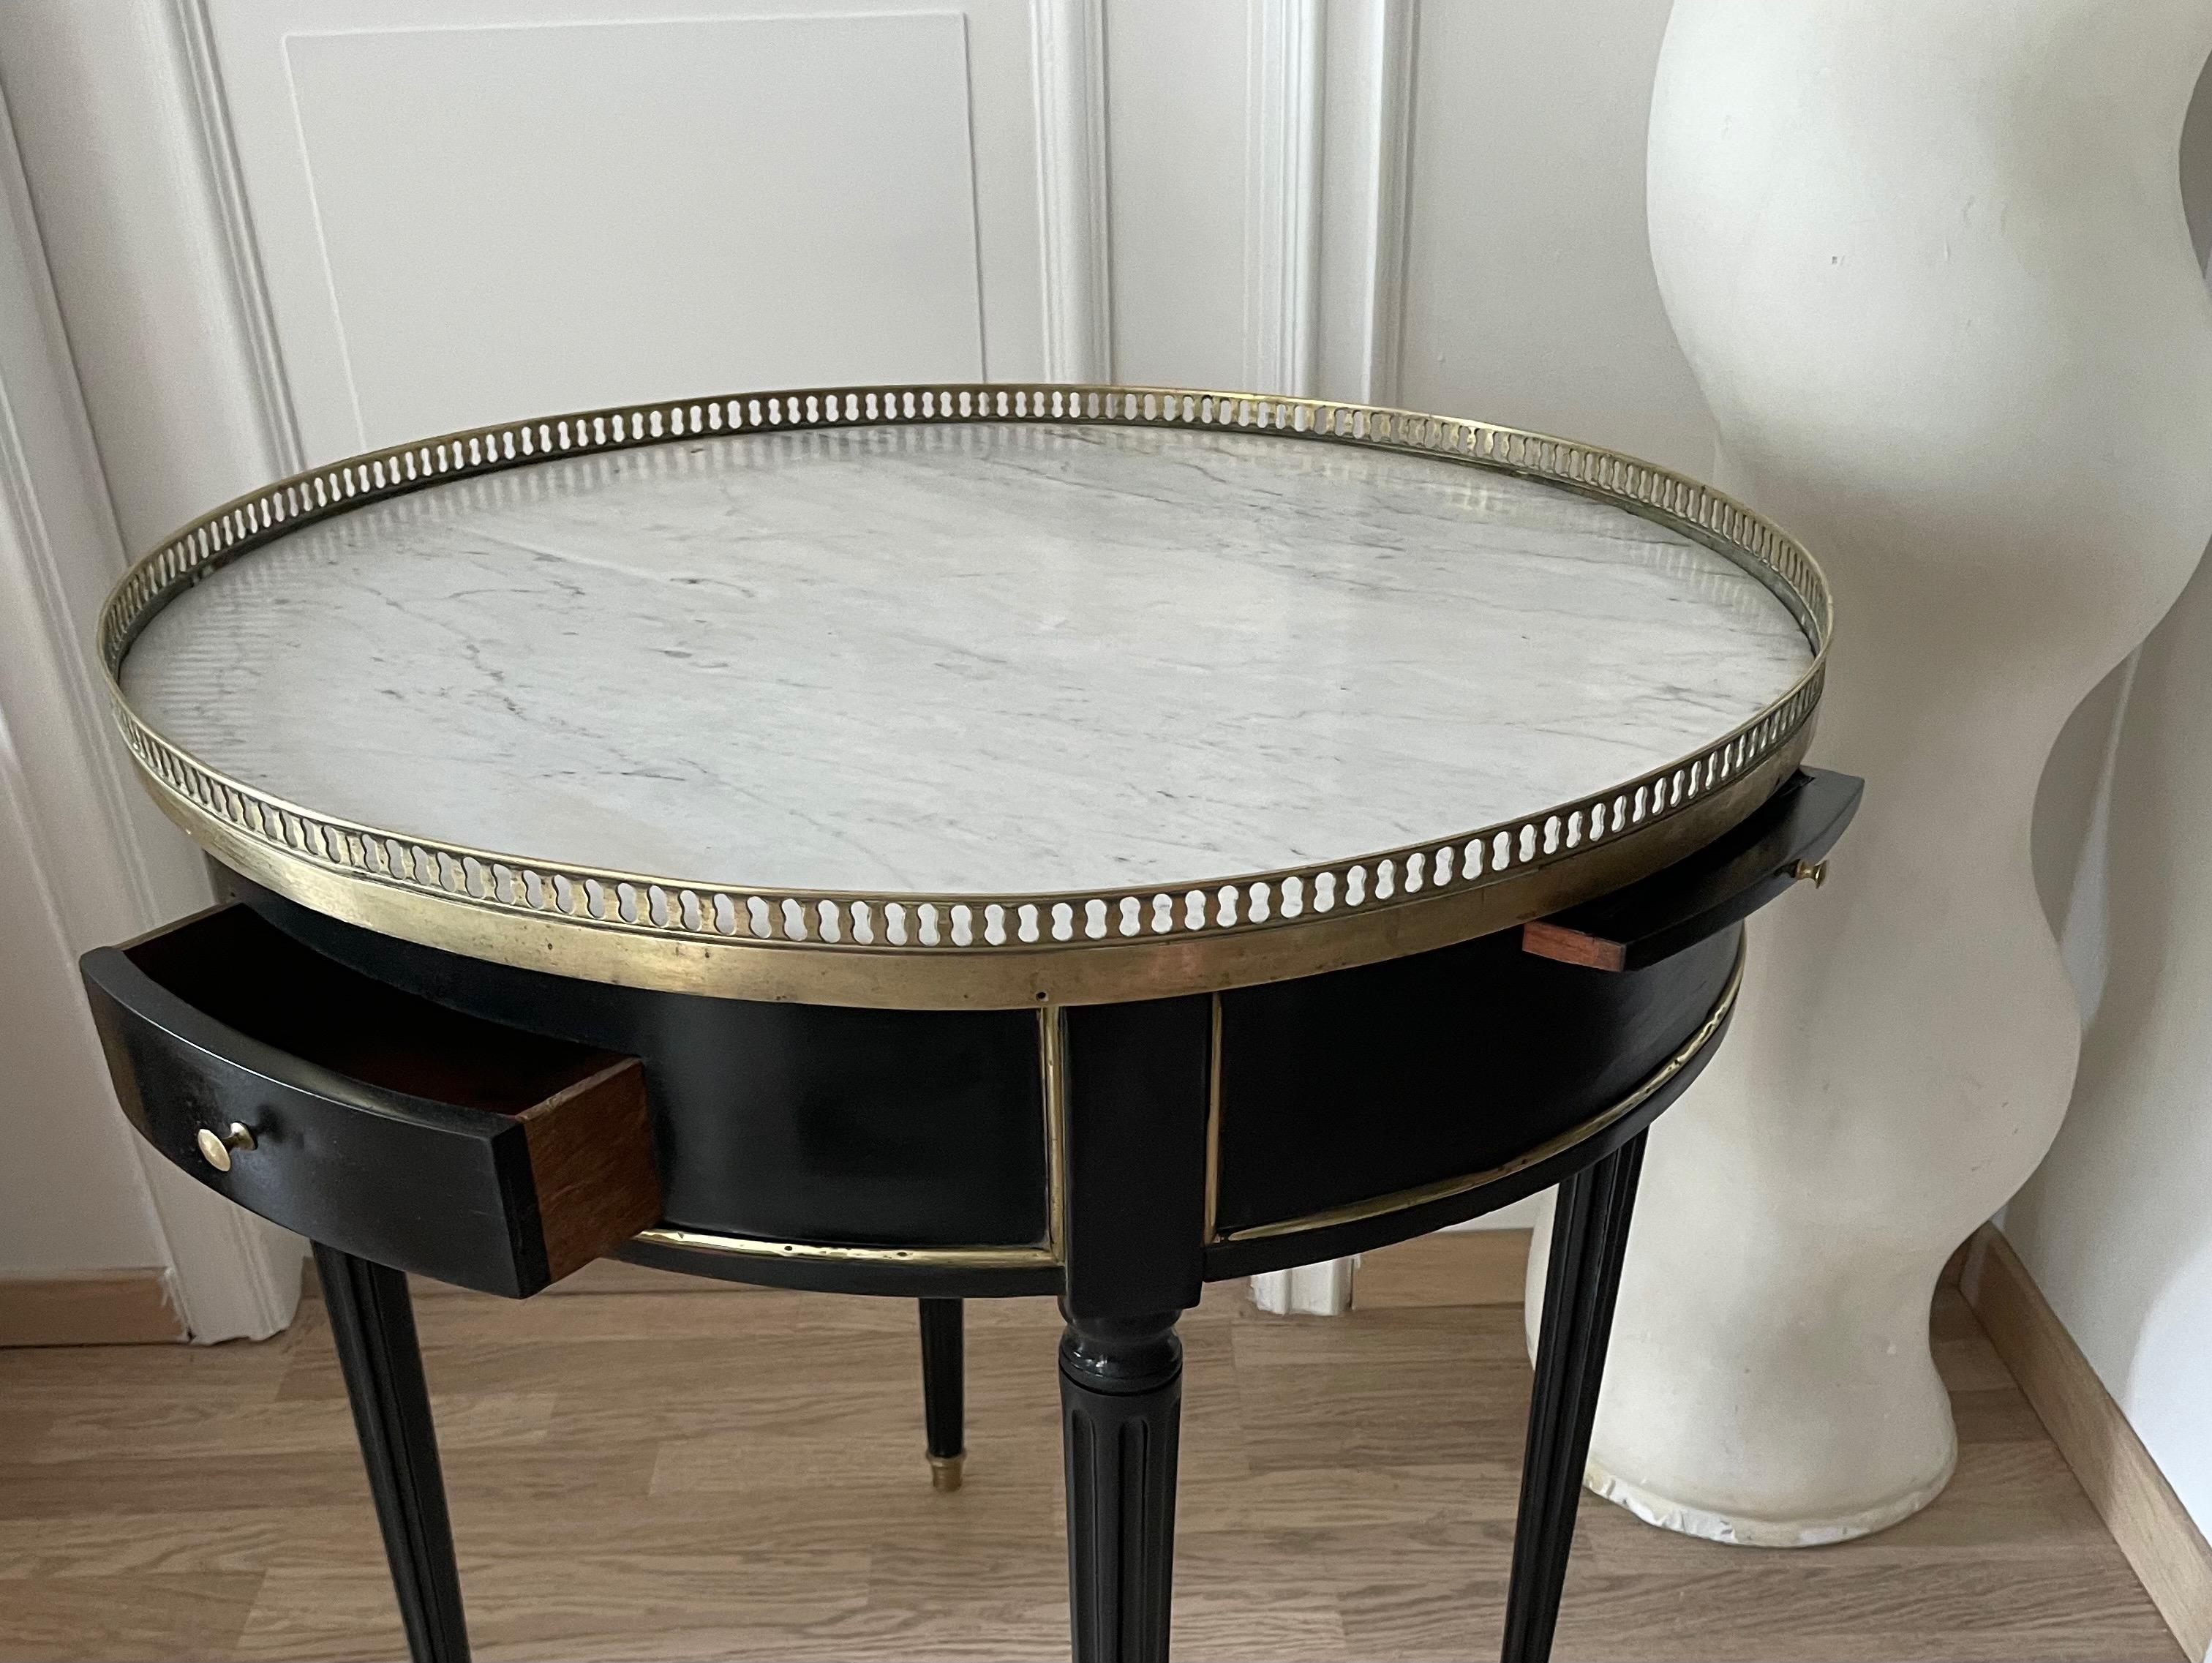 A Louis XVI style black lacquer side table with two drawers, two small shelves with leather, brass details ,marble top and a fine brass openwork gallery.
By Maison Jansen, France 1950.